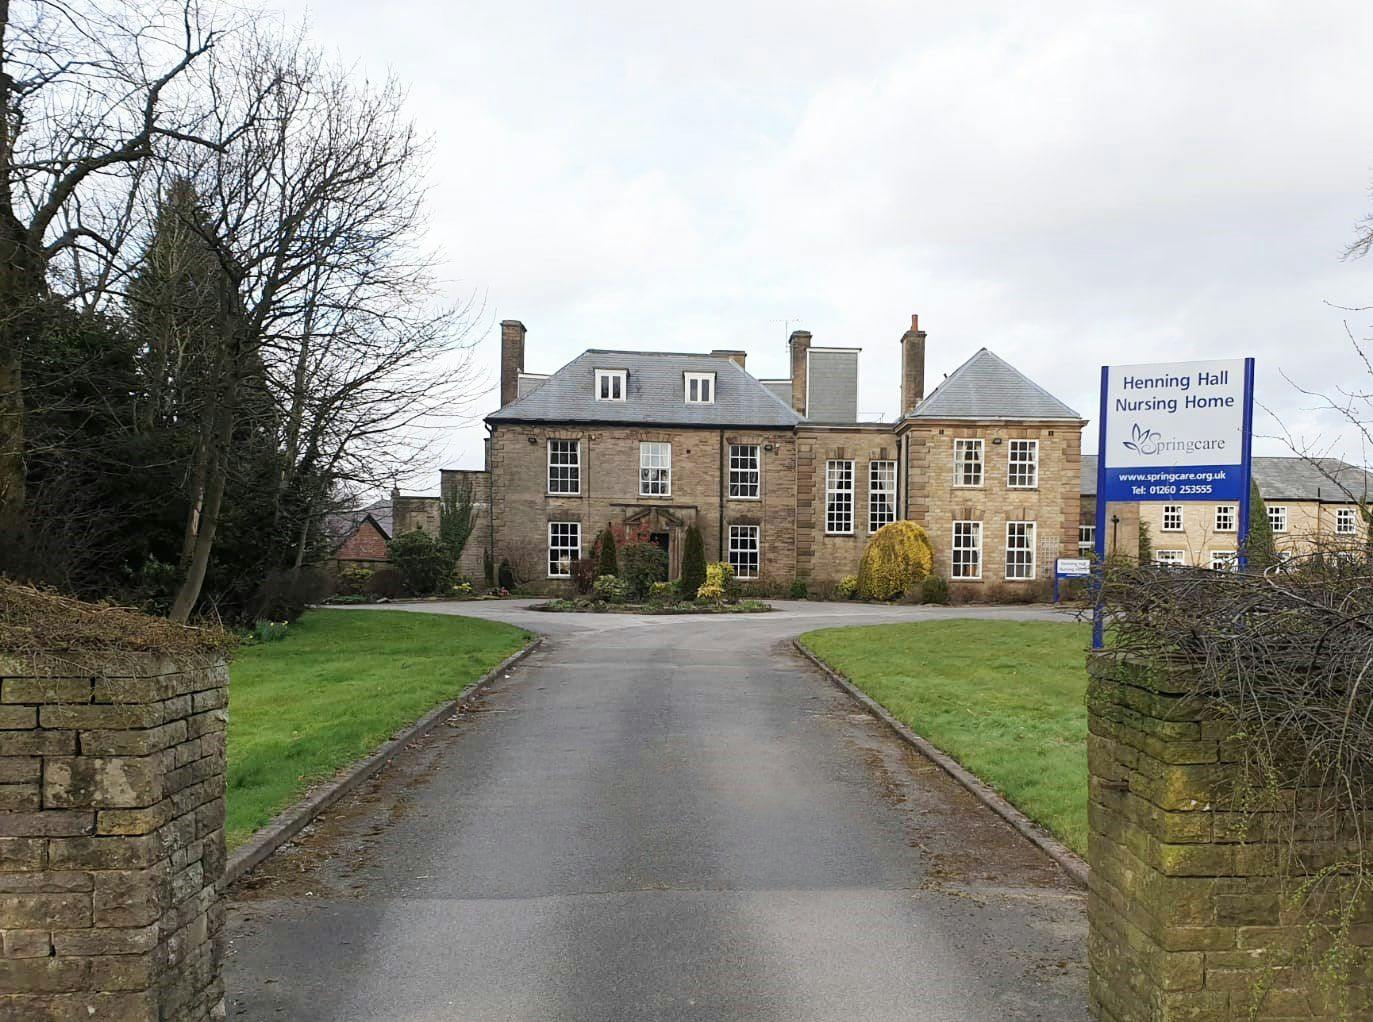 Exterior of Henning Hall in Macclesfield, Cheshire